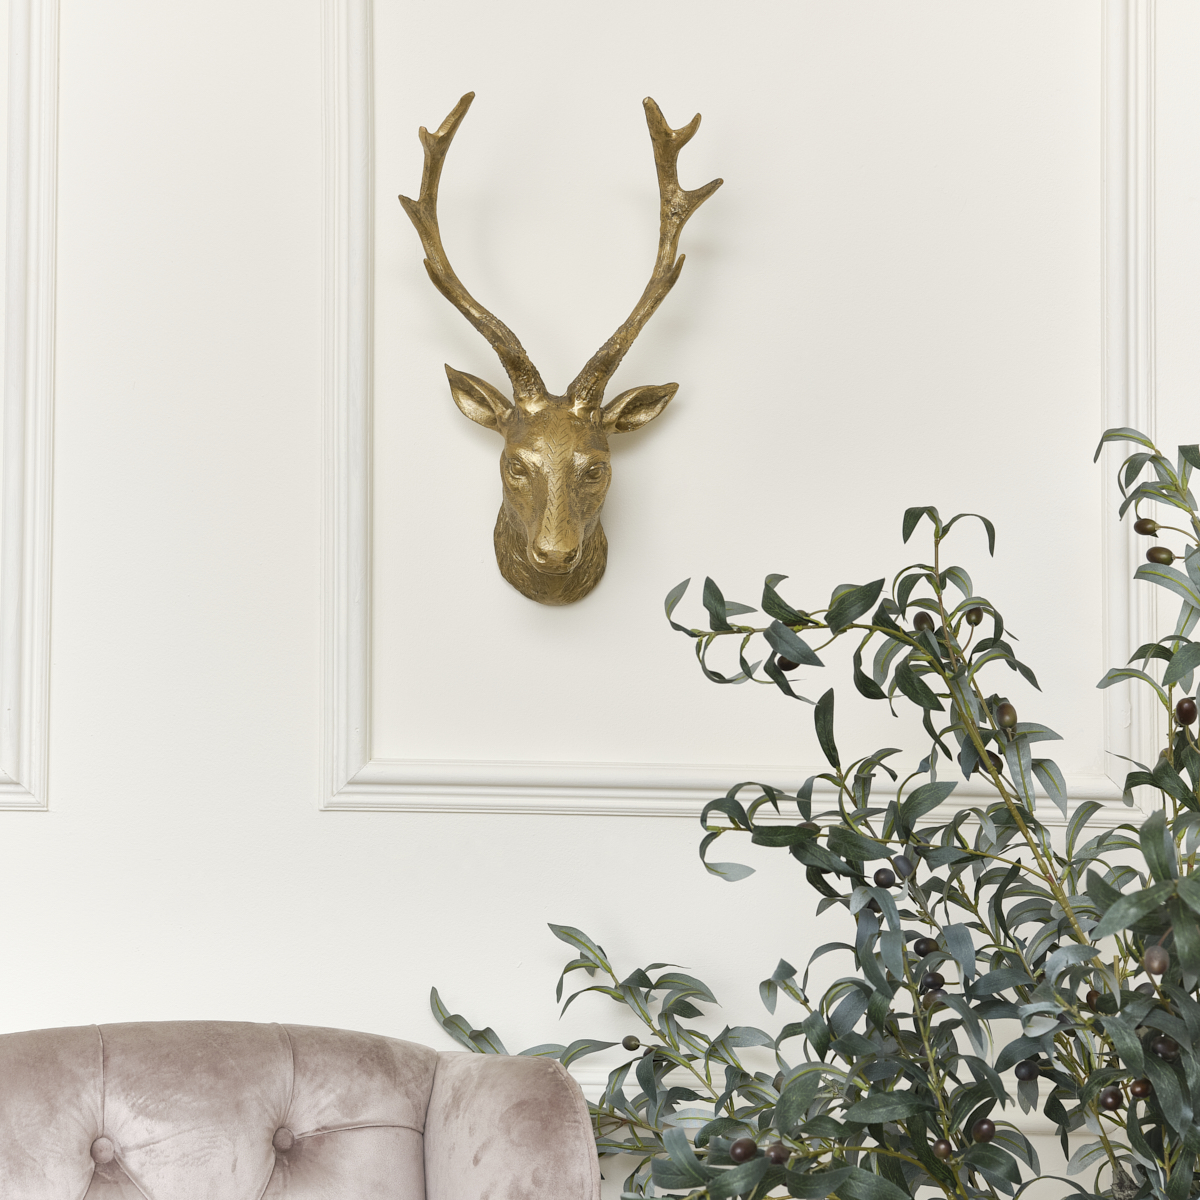 Antique Gold Metal Stag Head